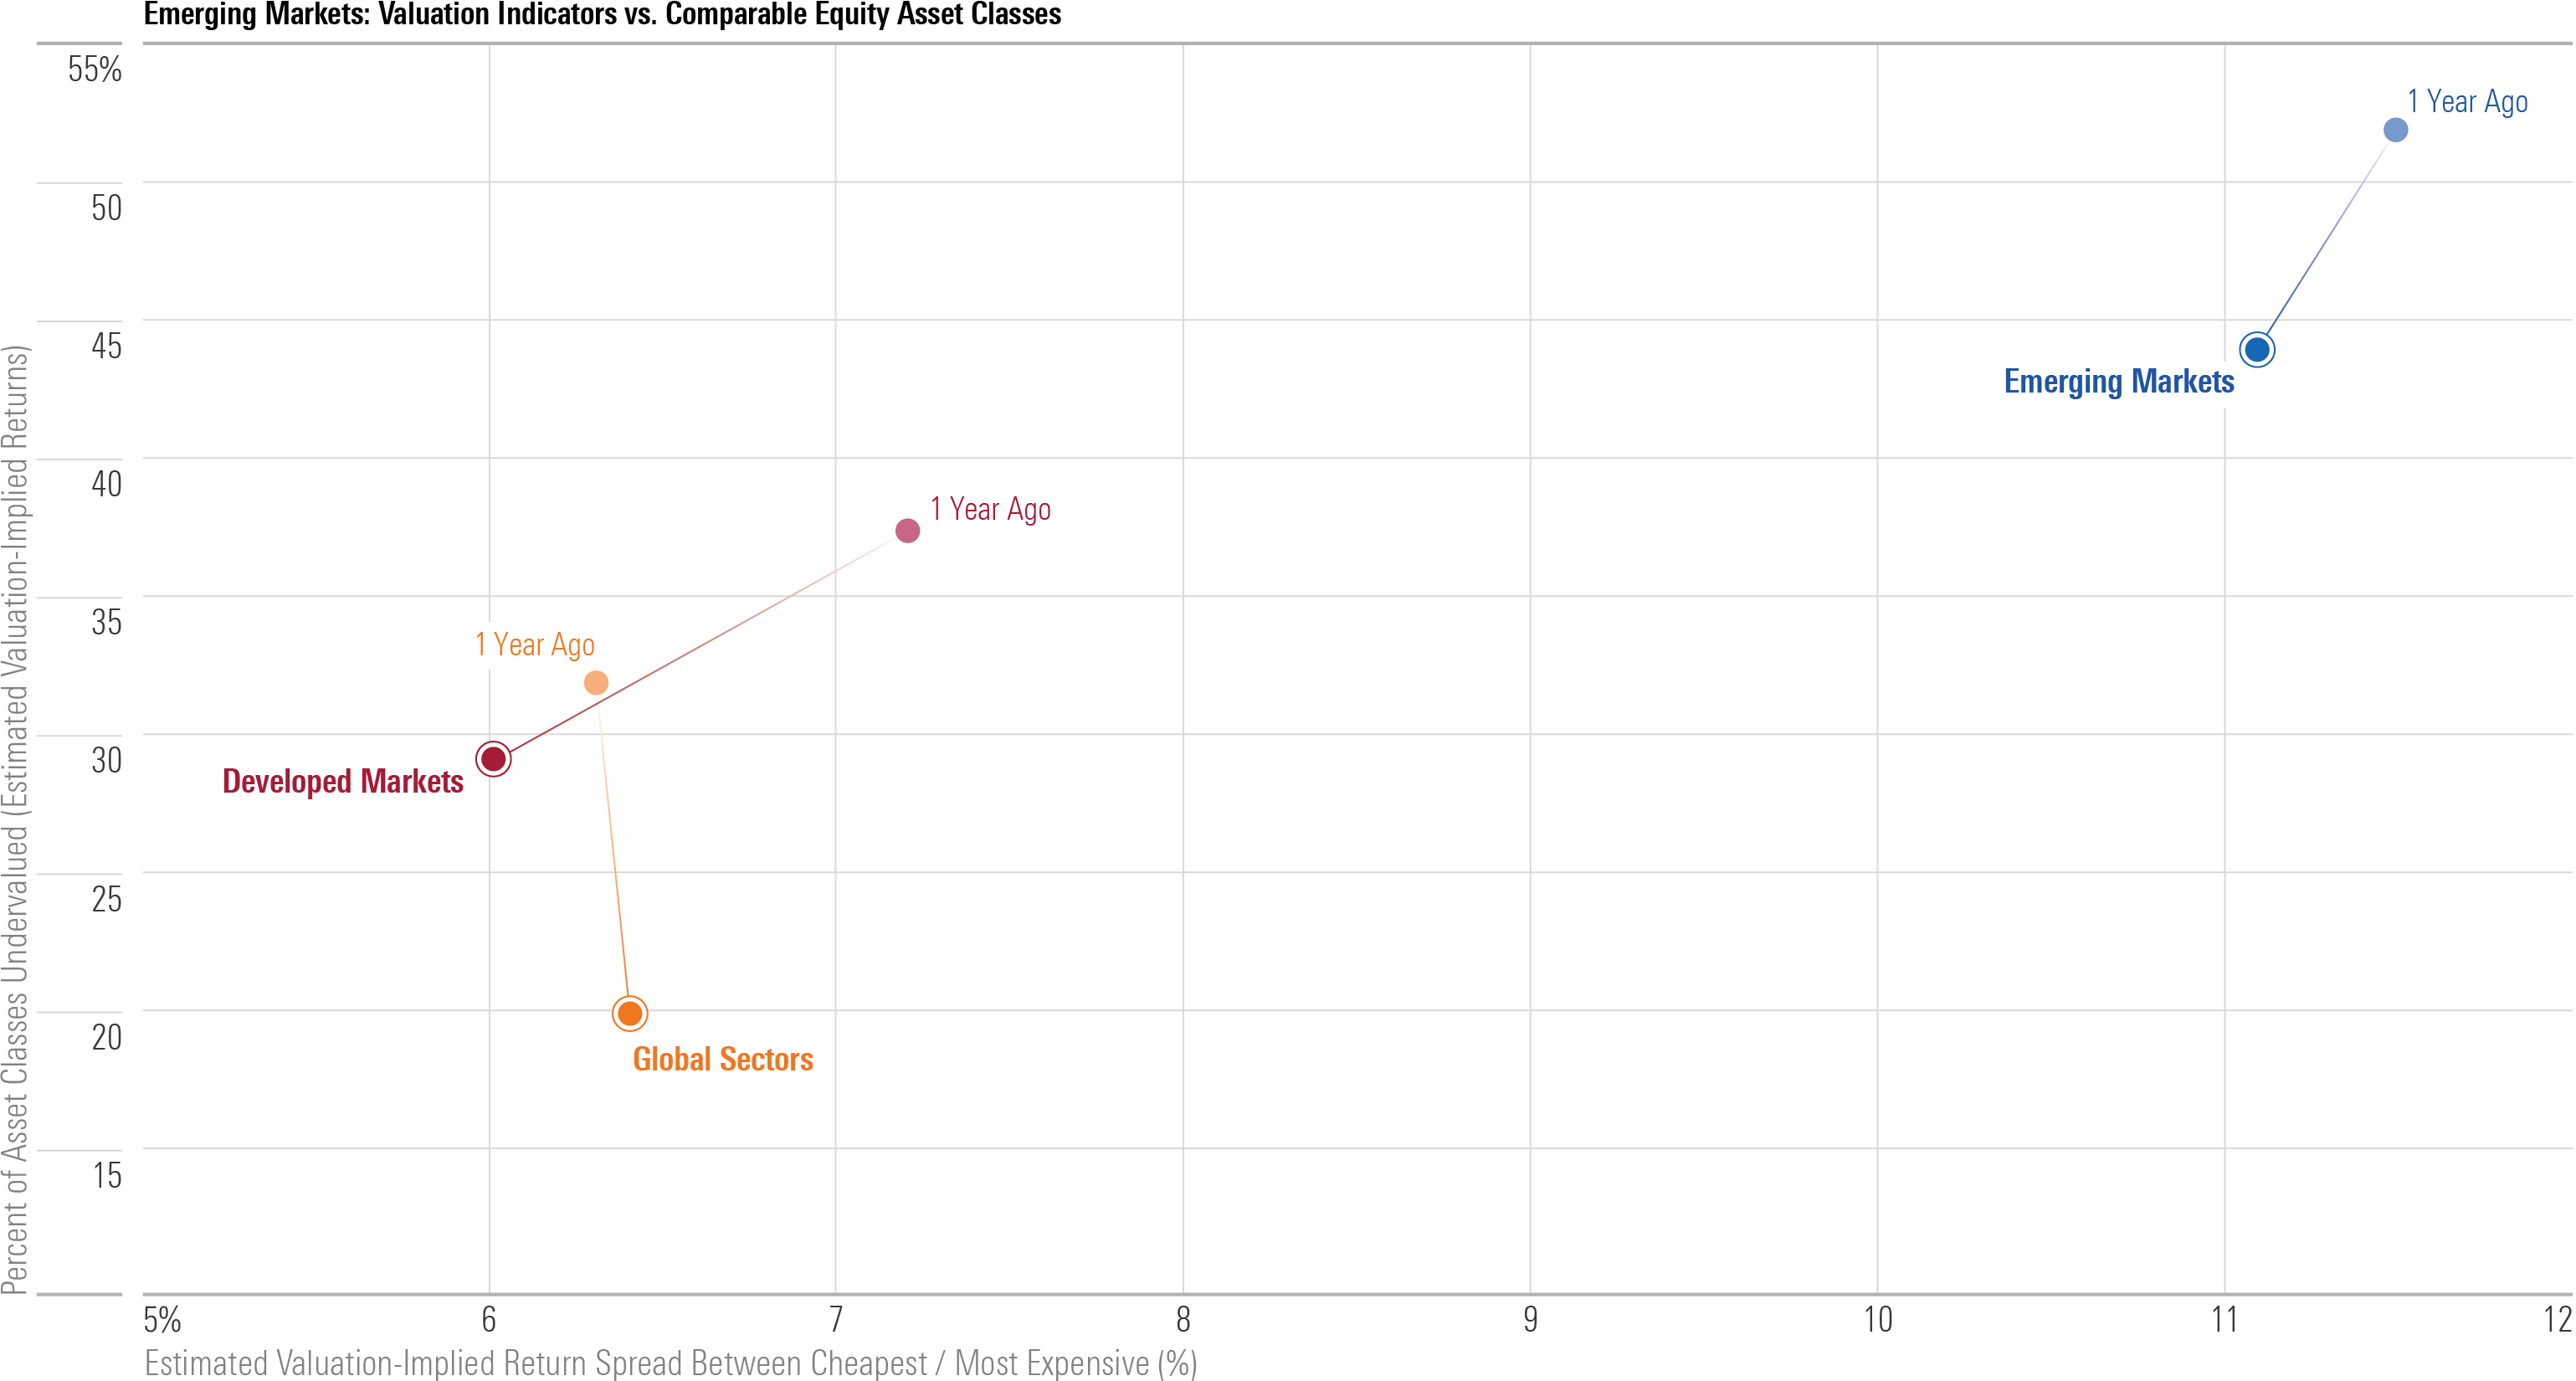 Graph comparing valuation indicators and comparable equity asset classes in emerging markets.